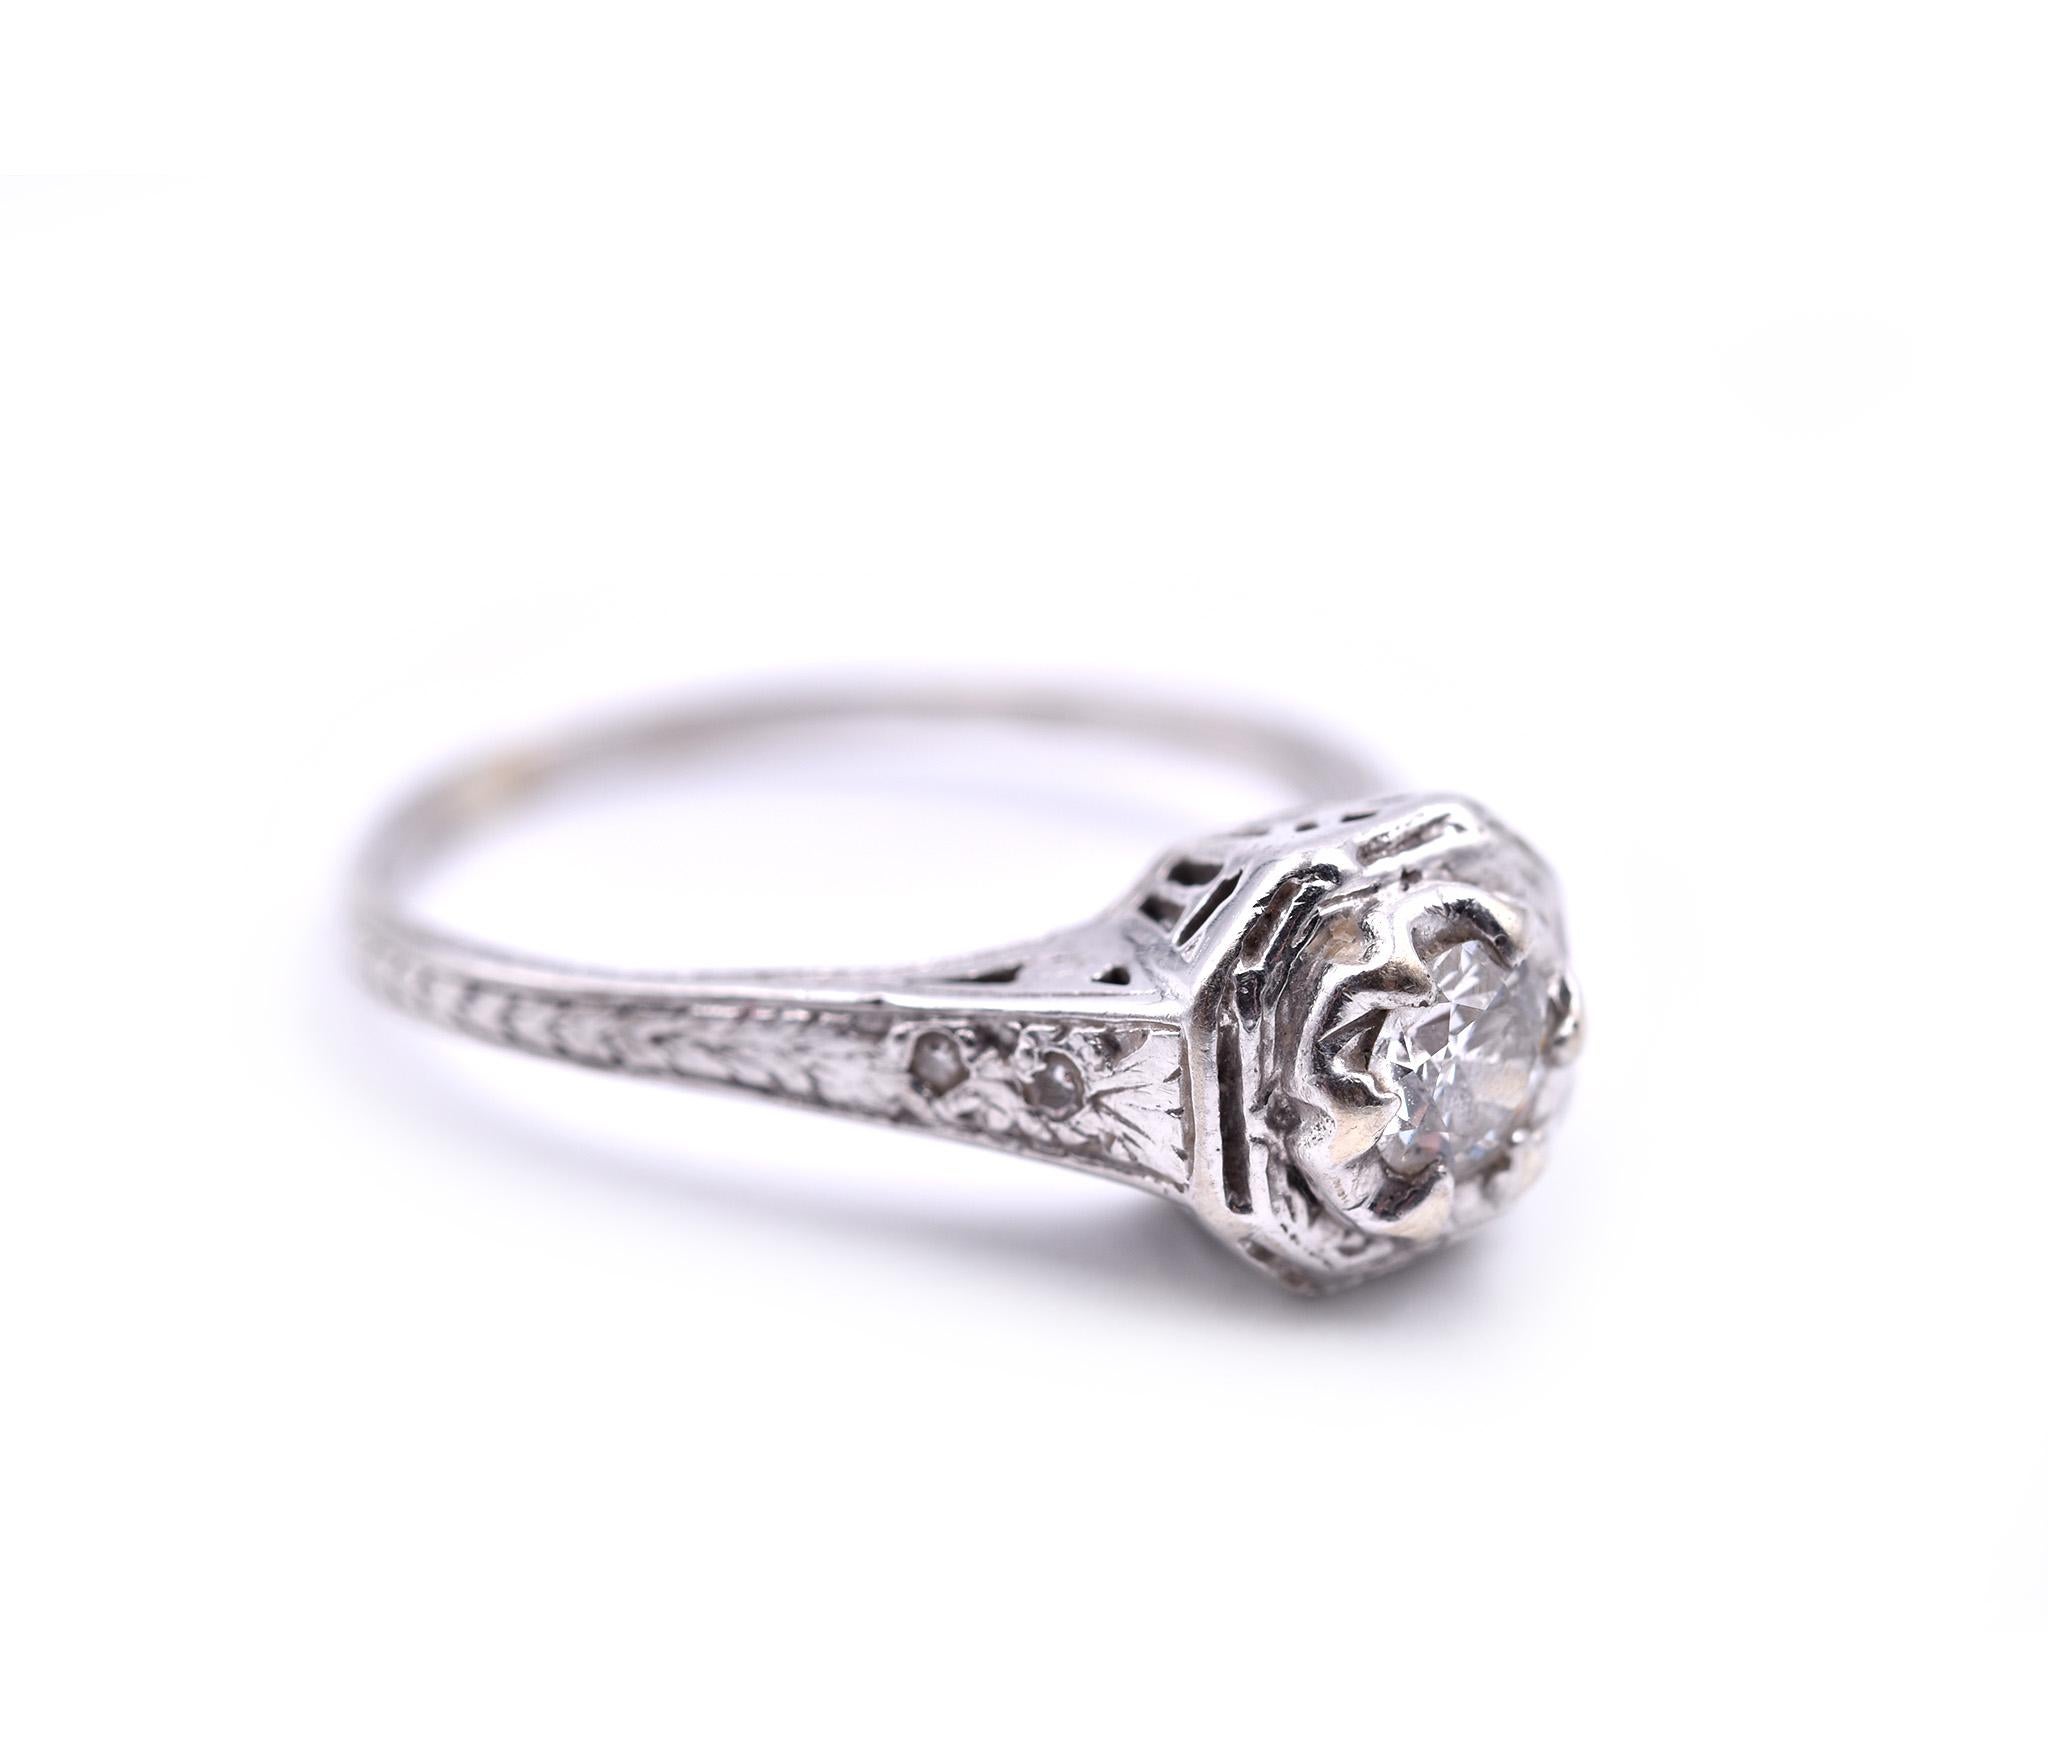 Designer: custom design
Material: 14k white gold 
Center Diamond: European cut = .36ct
Color: H	
Clarity: SI1
Diamond: four diamonds= .02cttw
Ring Size: 8 ¾ (please allow two additional shipping days for sizing requests)
Dimensions: ring top is